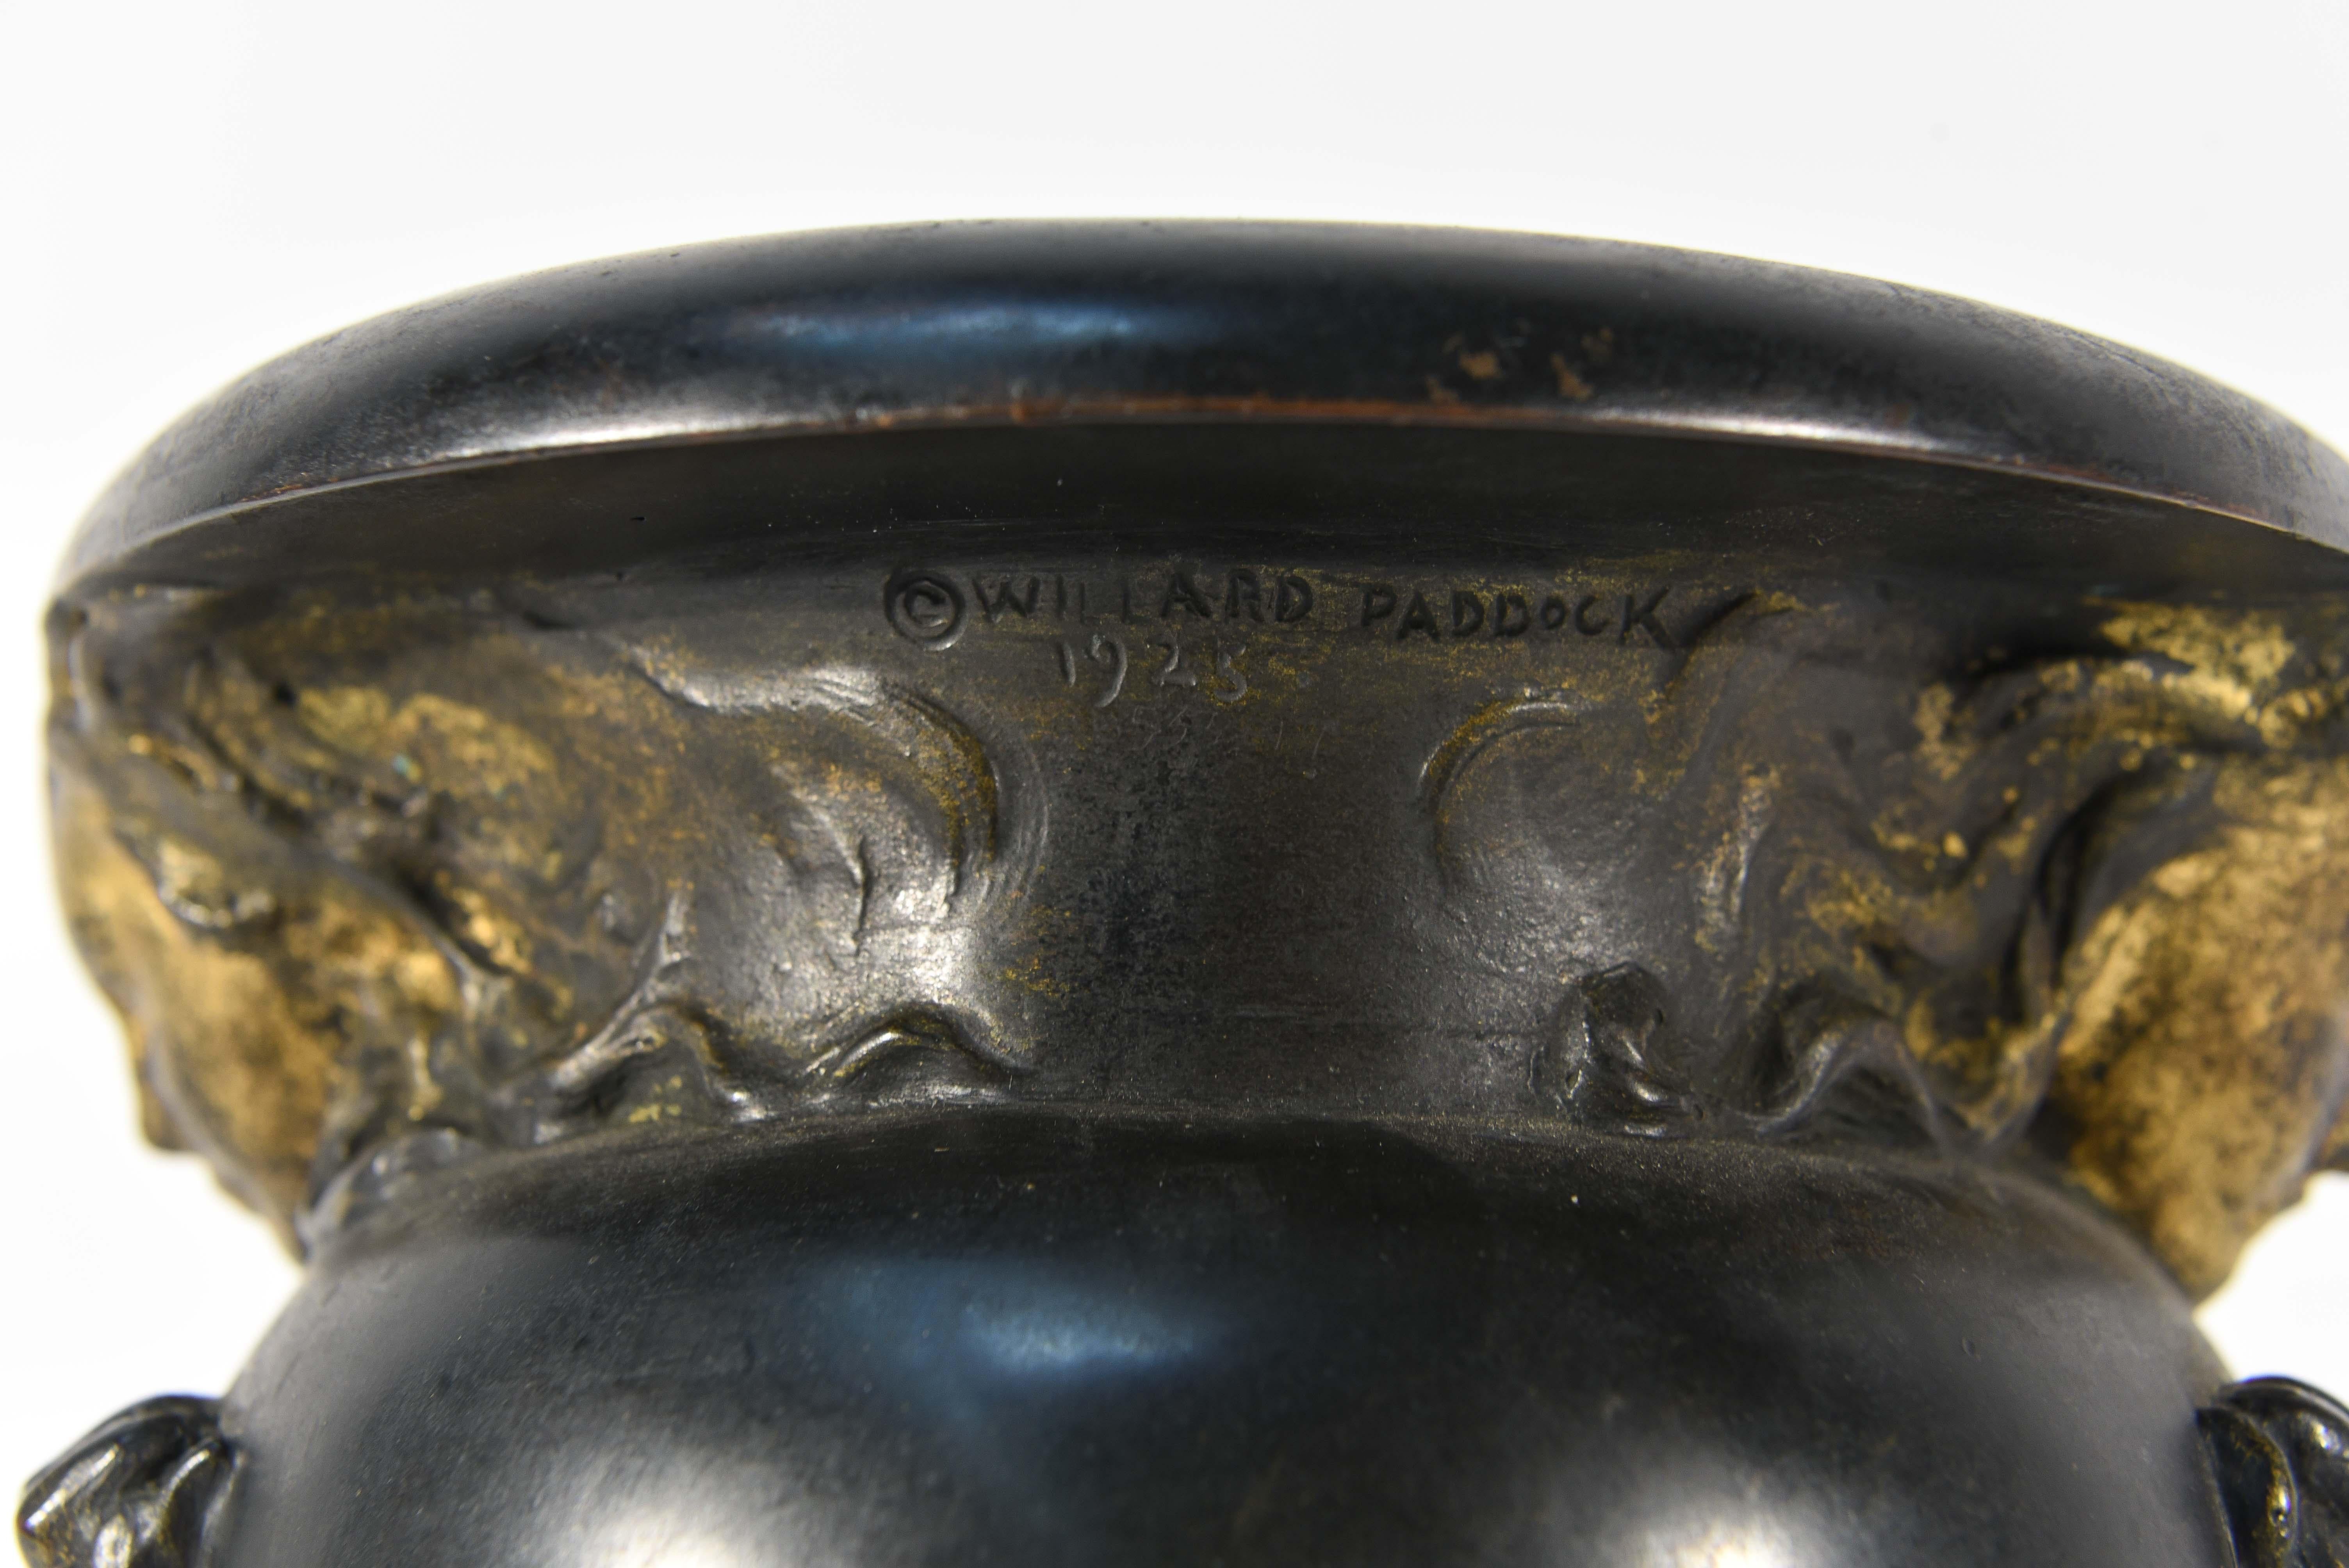 Art Nouveau maidens in gold wash faces holding garlands on the side. Bronze vase with insert signed under the rim, Willard Paddock, 1925.